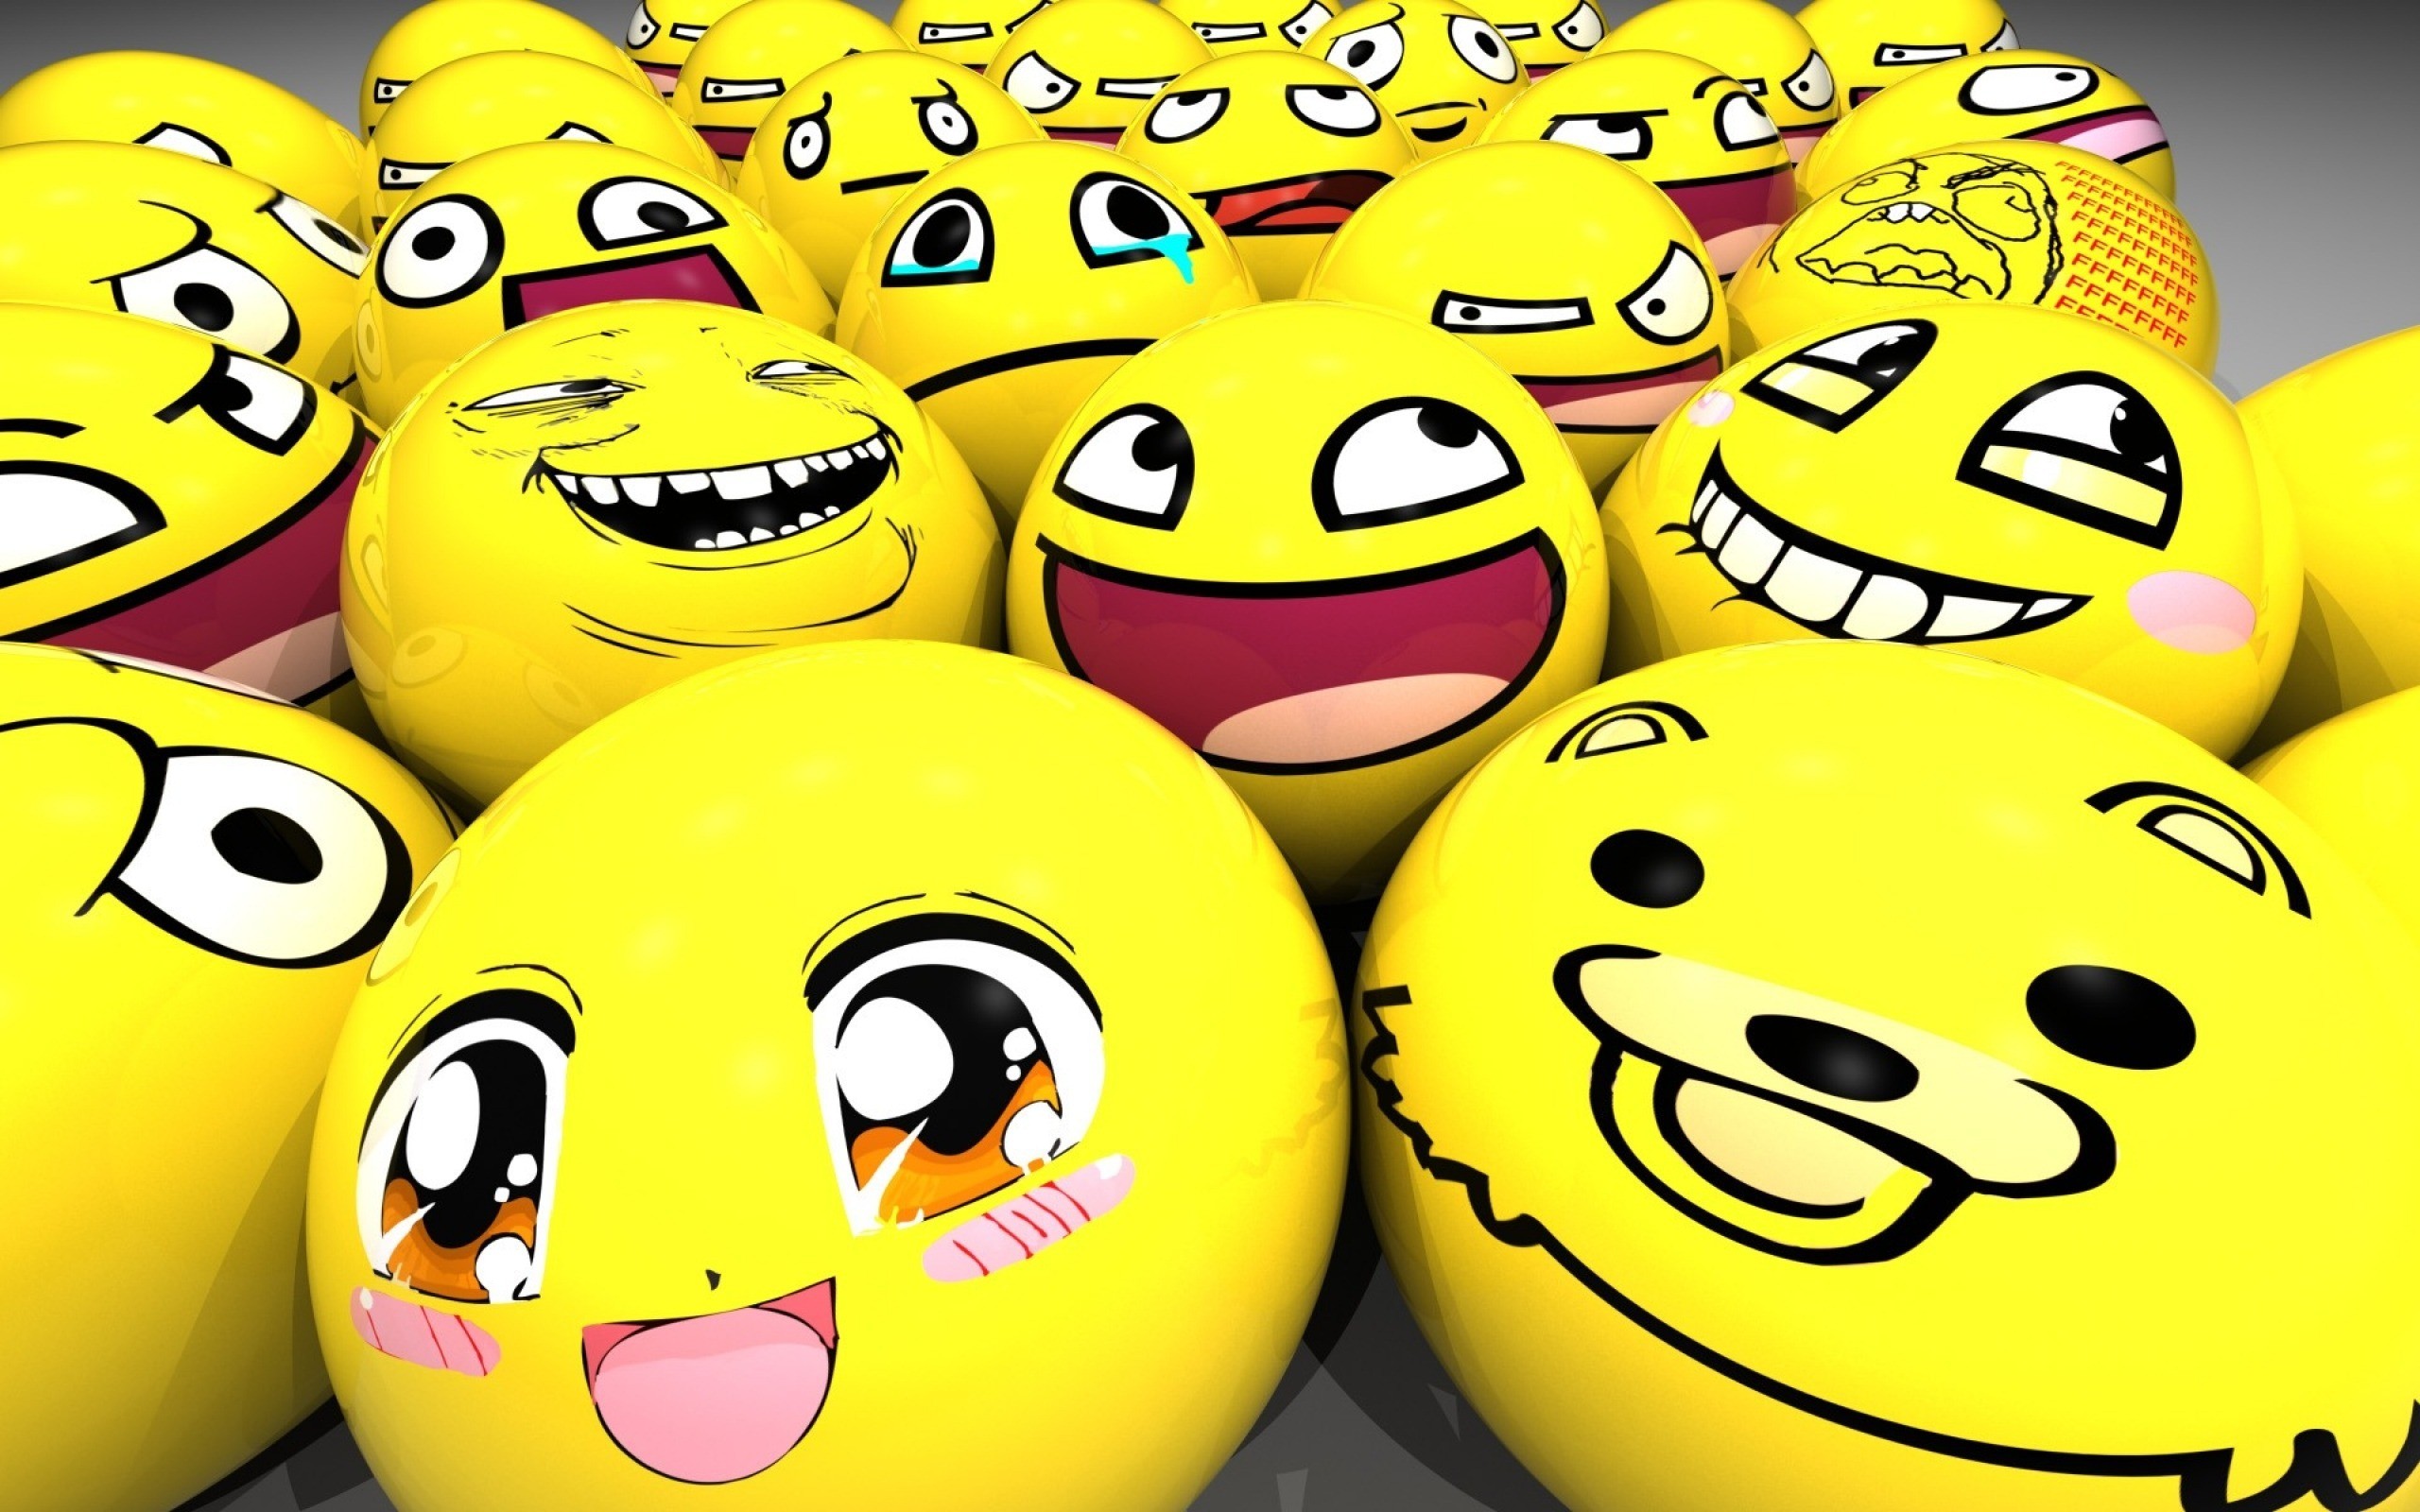 General 2560x1600 smiley memes colorful